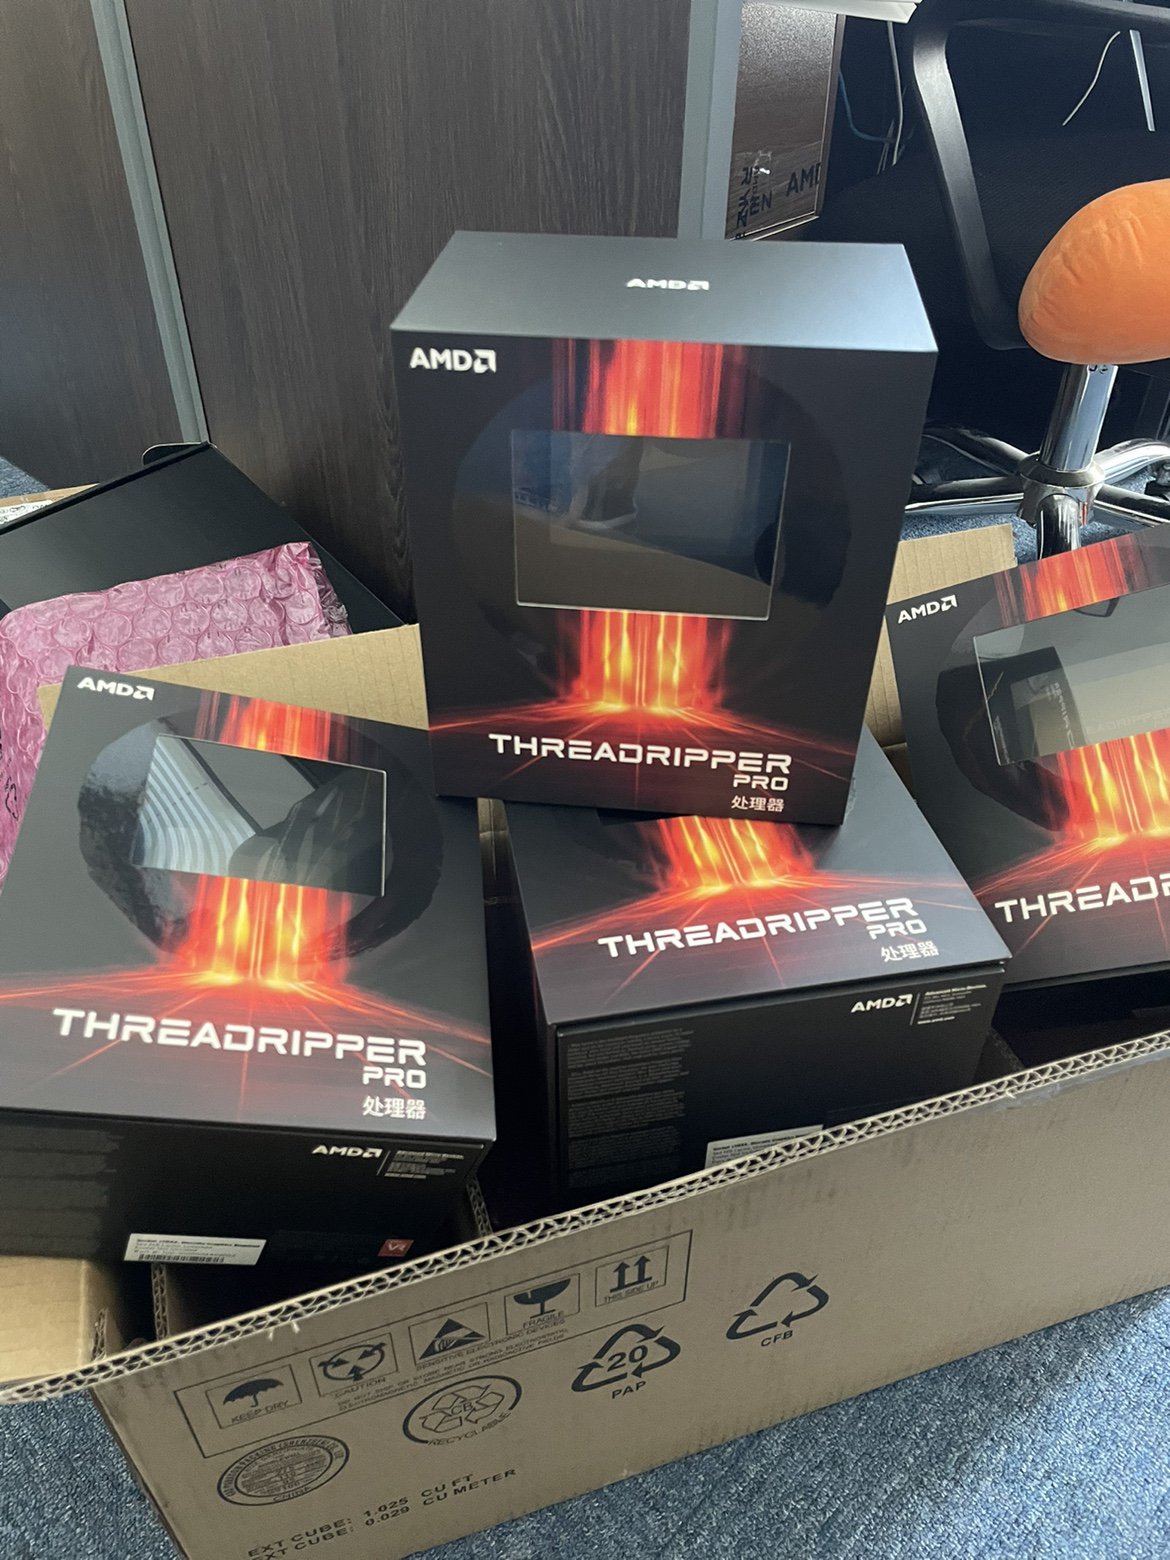 Media asset in full size related to 3dfxzone.it news item entitled as follows: Le CPU AMD Ryzen Threadripper PRO 5000WX nel mercato DIY cinese: i prezzi | Image Name: news33422_Ryzen-Threadripper-PRO-5000WX_3.jpg